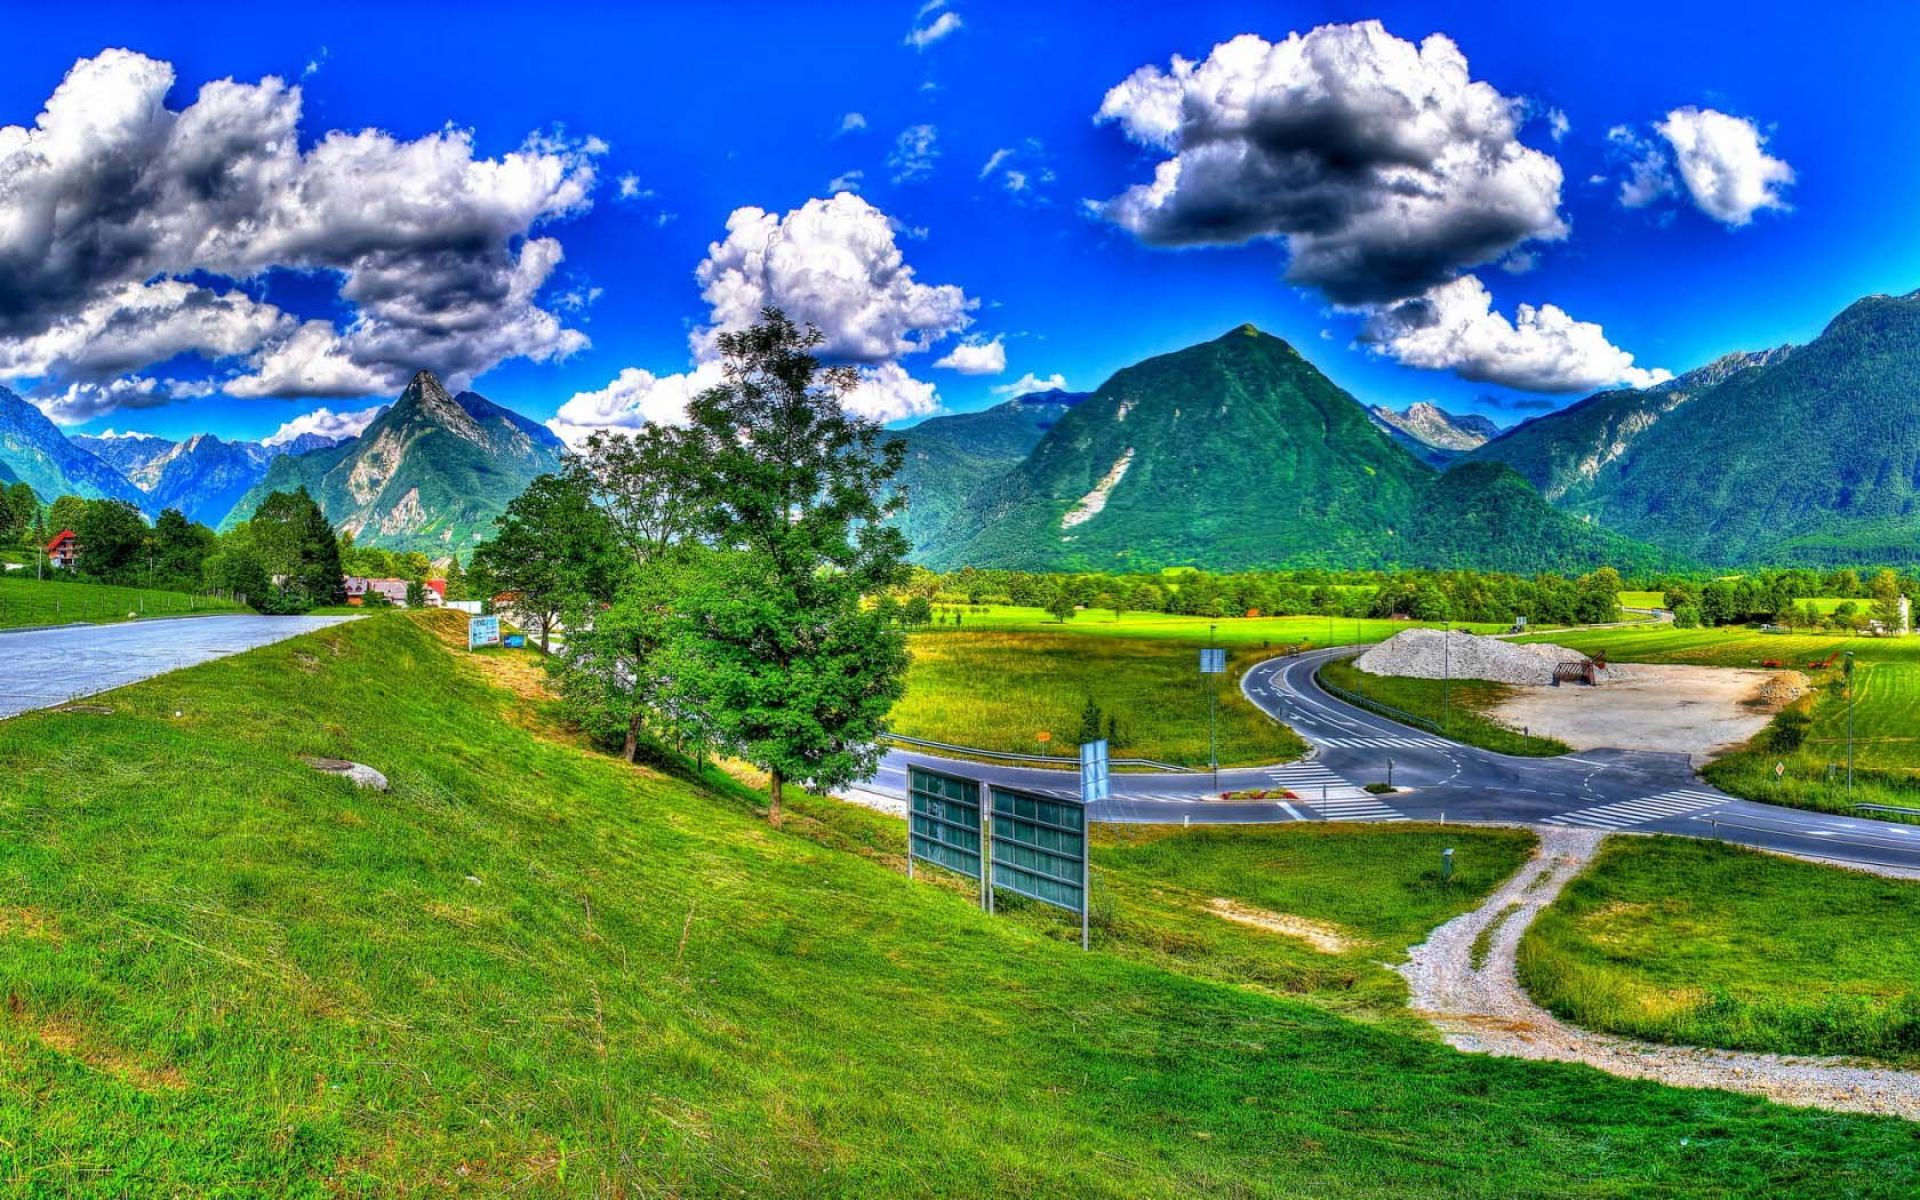 The Complex Village Road. HD Nature Wallpaper for Mobile and Desktop